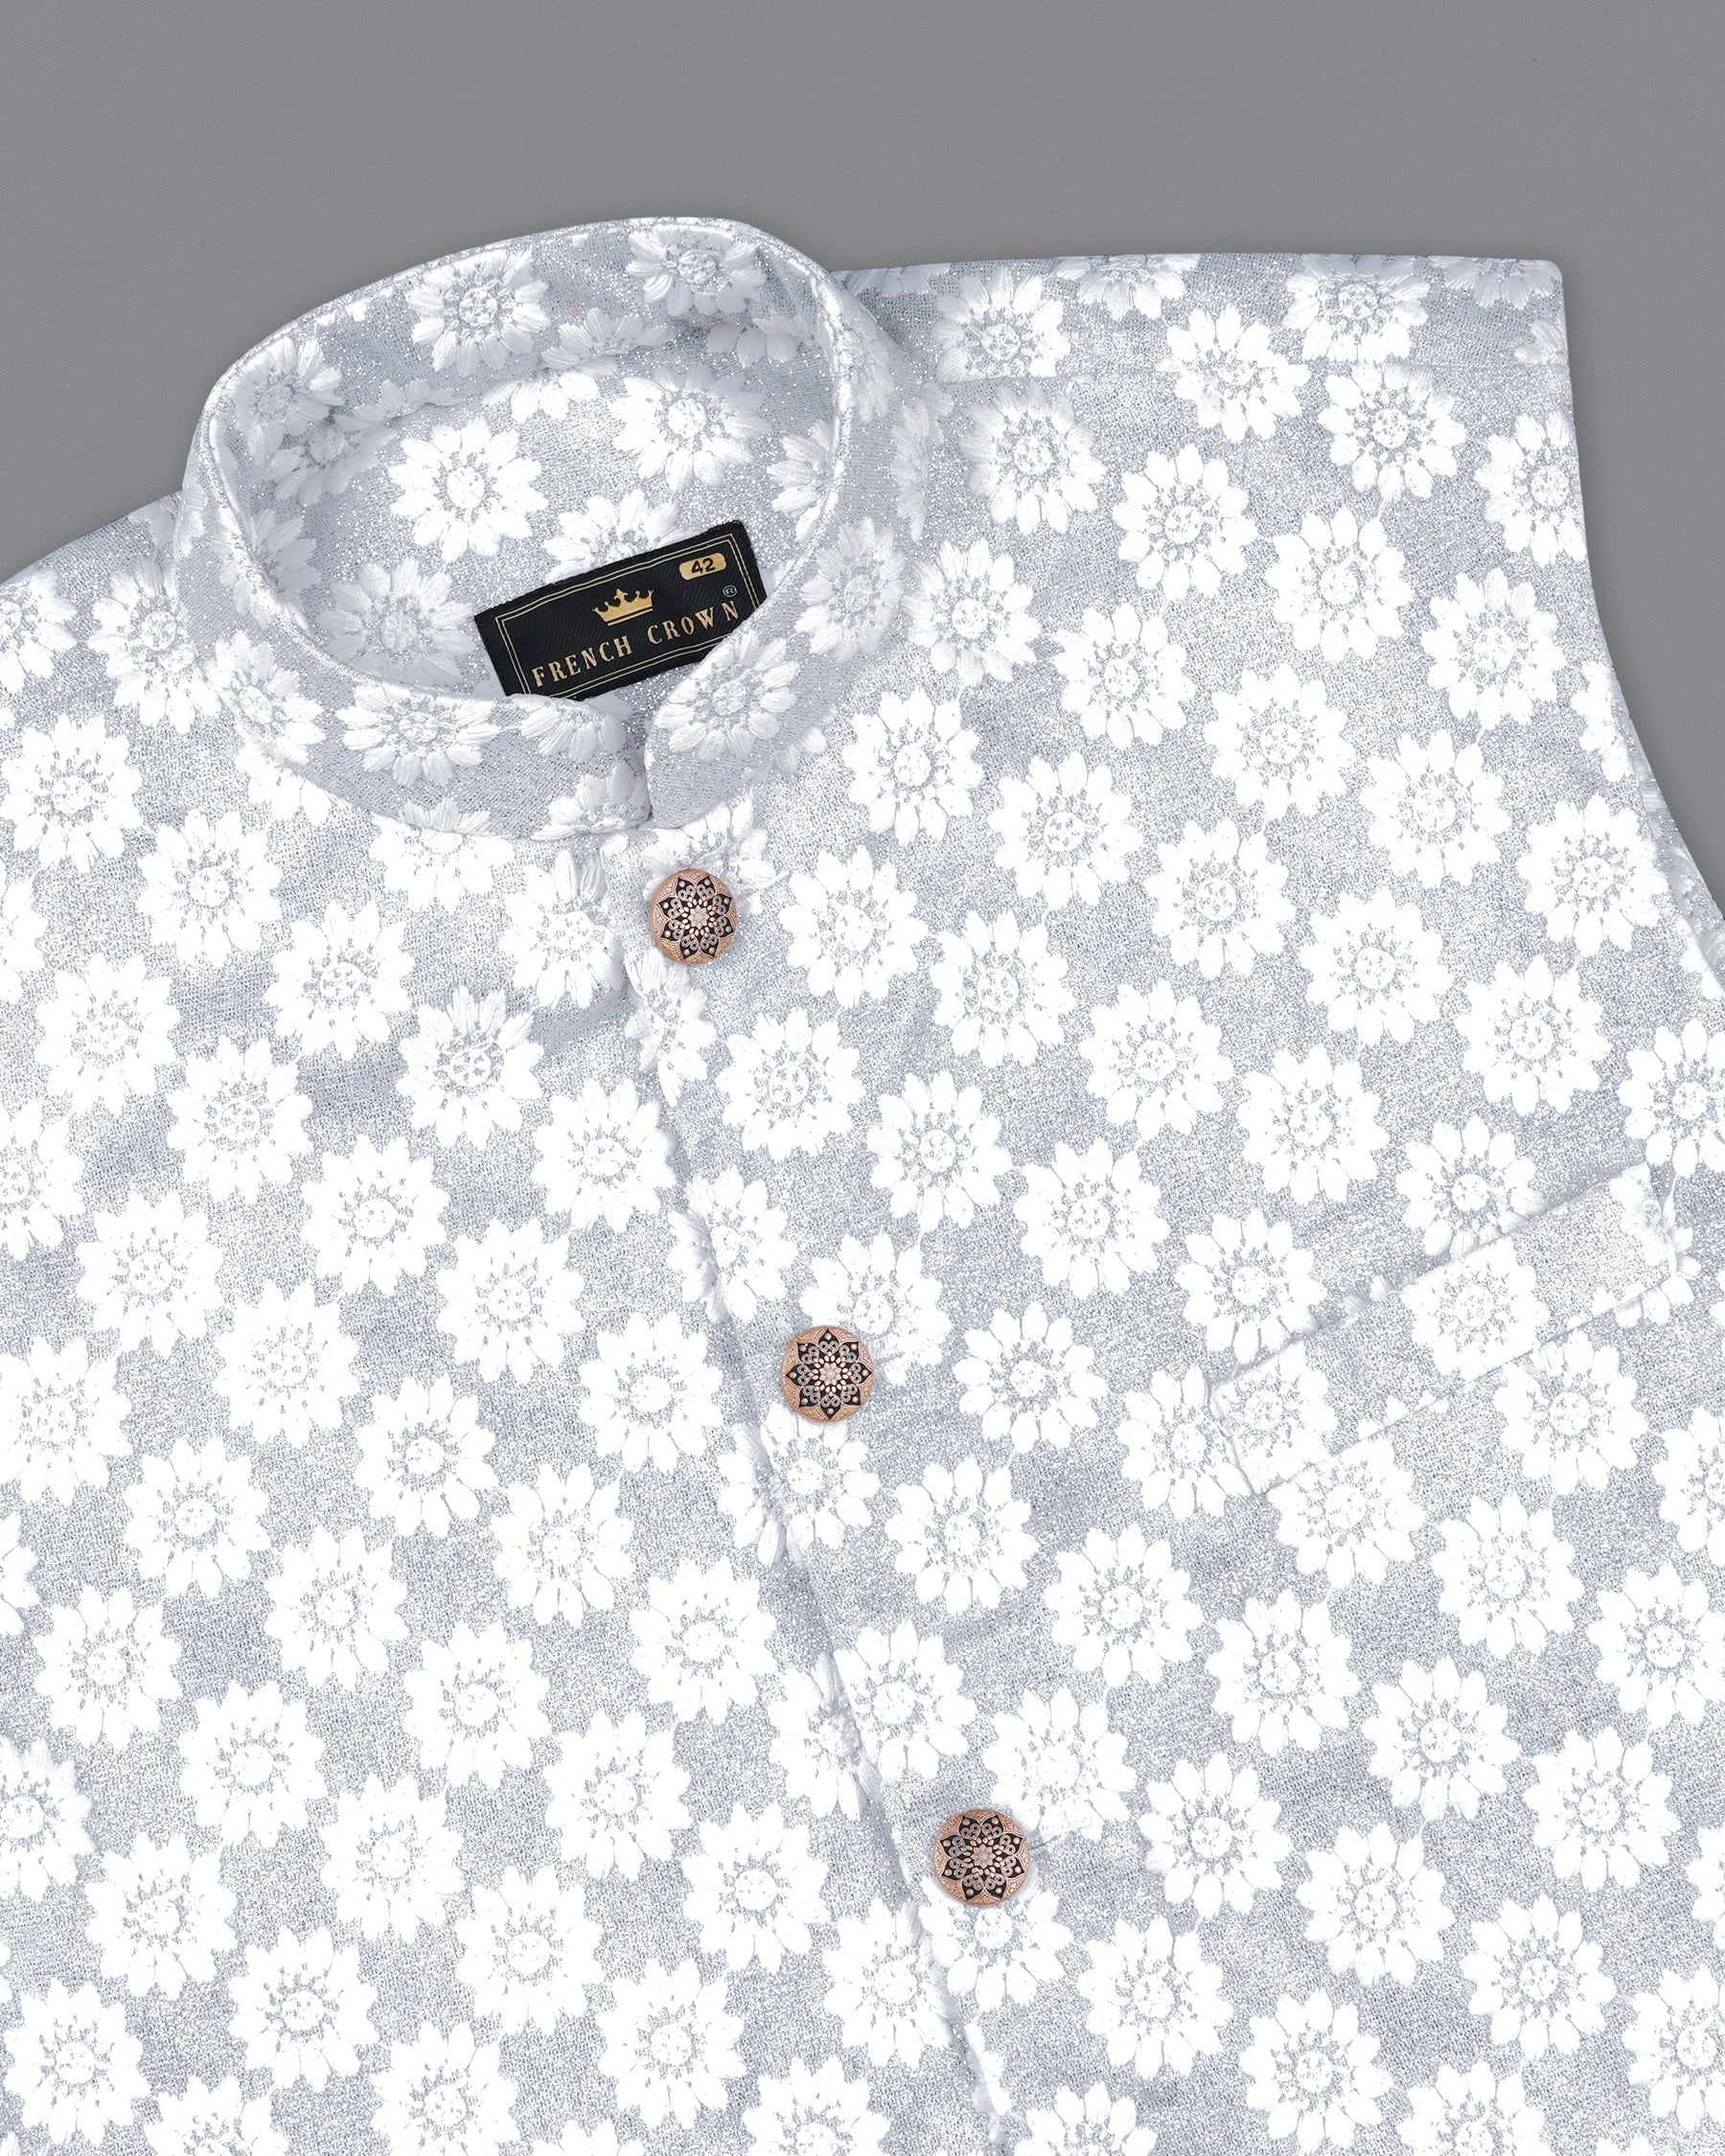 Heather Silver with White Floral Embroidered Nehru Jacket WC2160-38, WC2160-39, WC2160-40, WC2160-42, WC2160-44, WC2160-46, WC2160-48, WC2160-50, WC2160-52